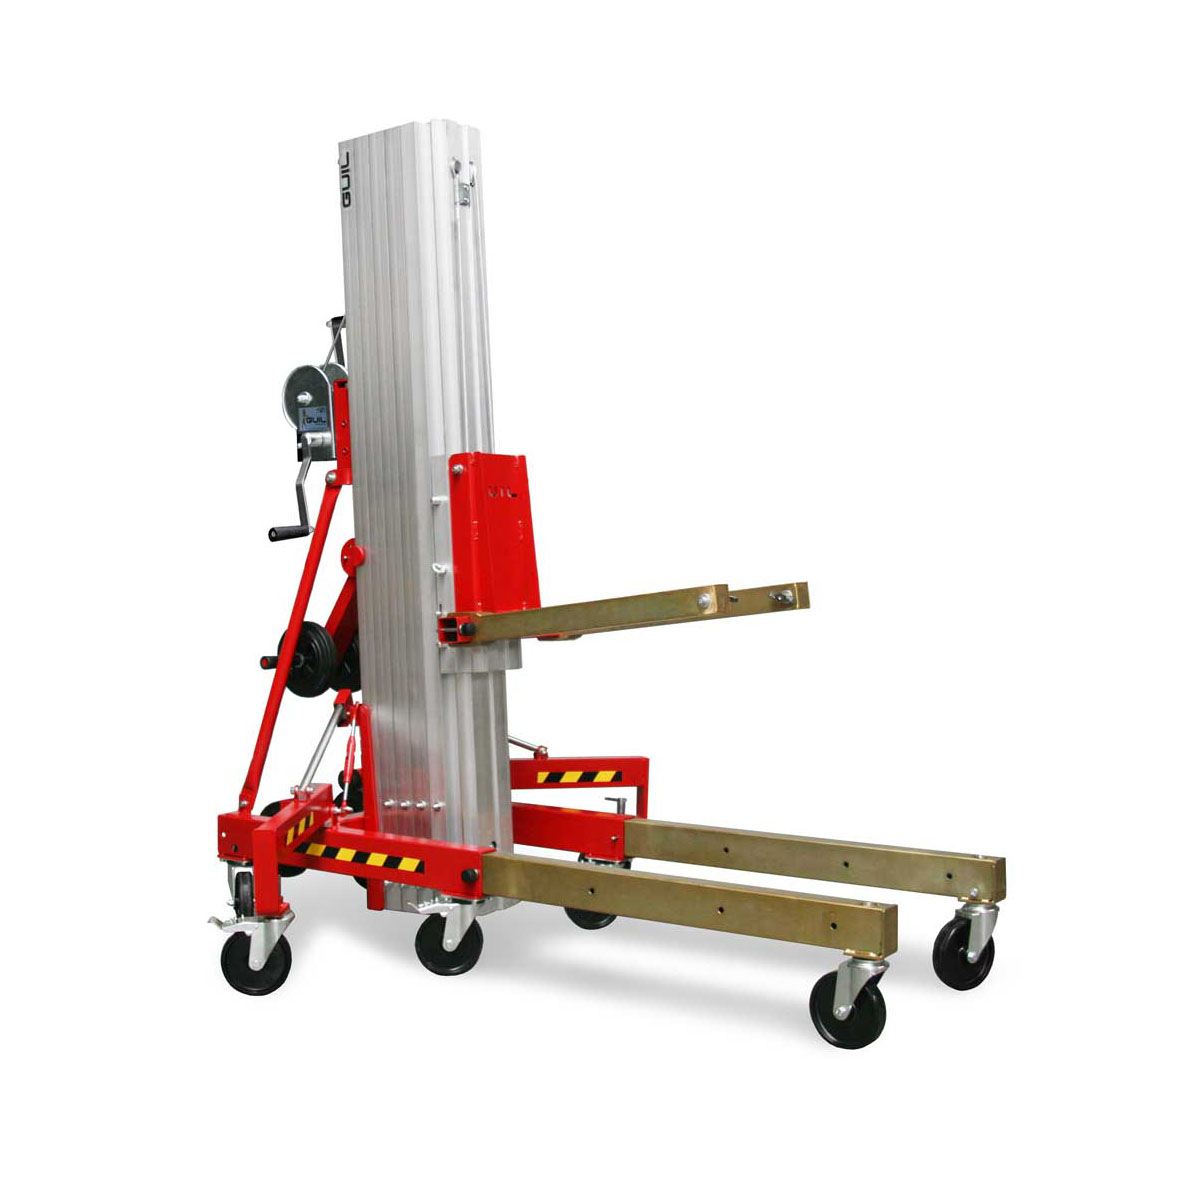 Image of the versatile GUIL Material Lifter with the ability to insert legs at the front and back of the tower.